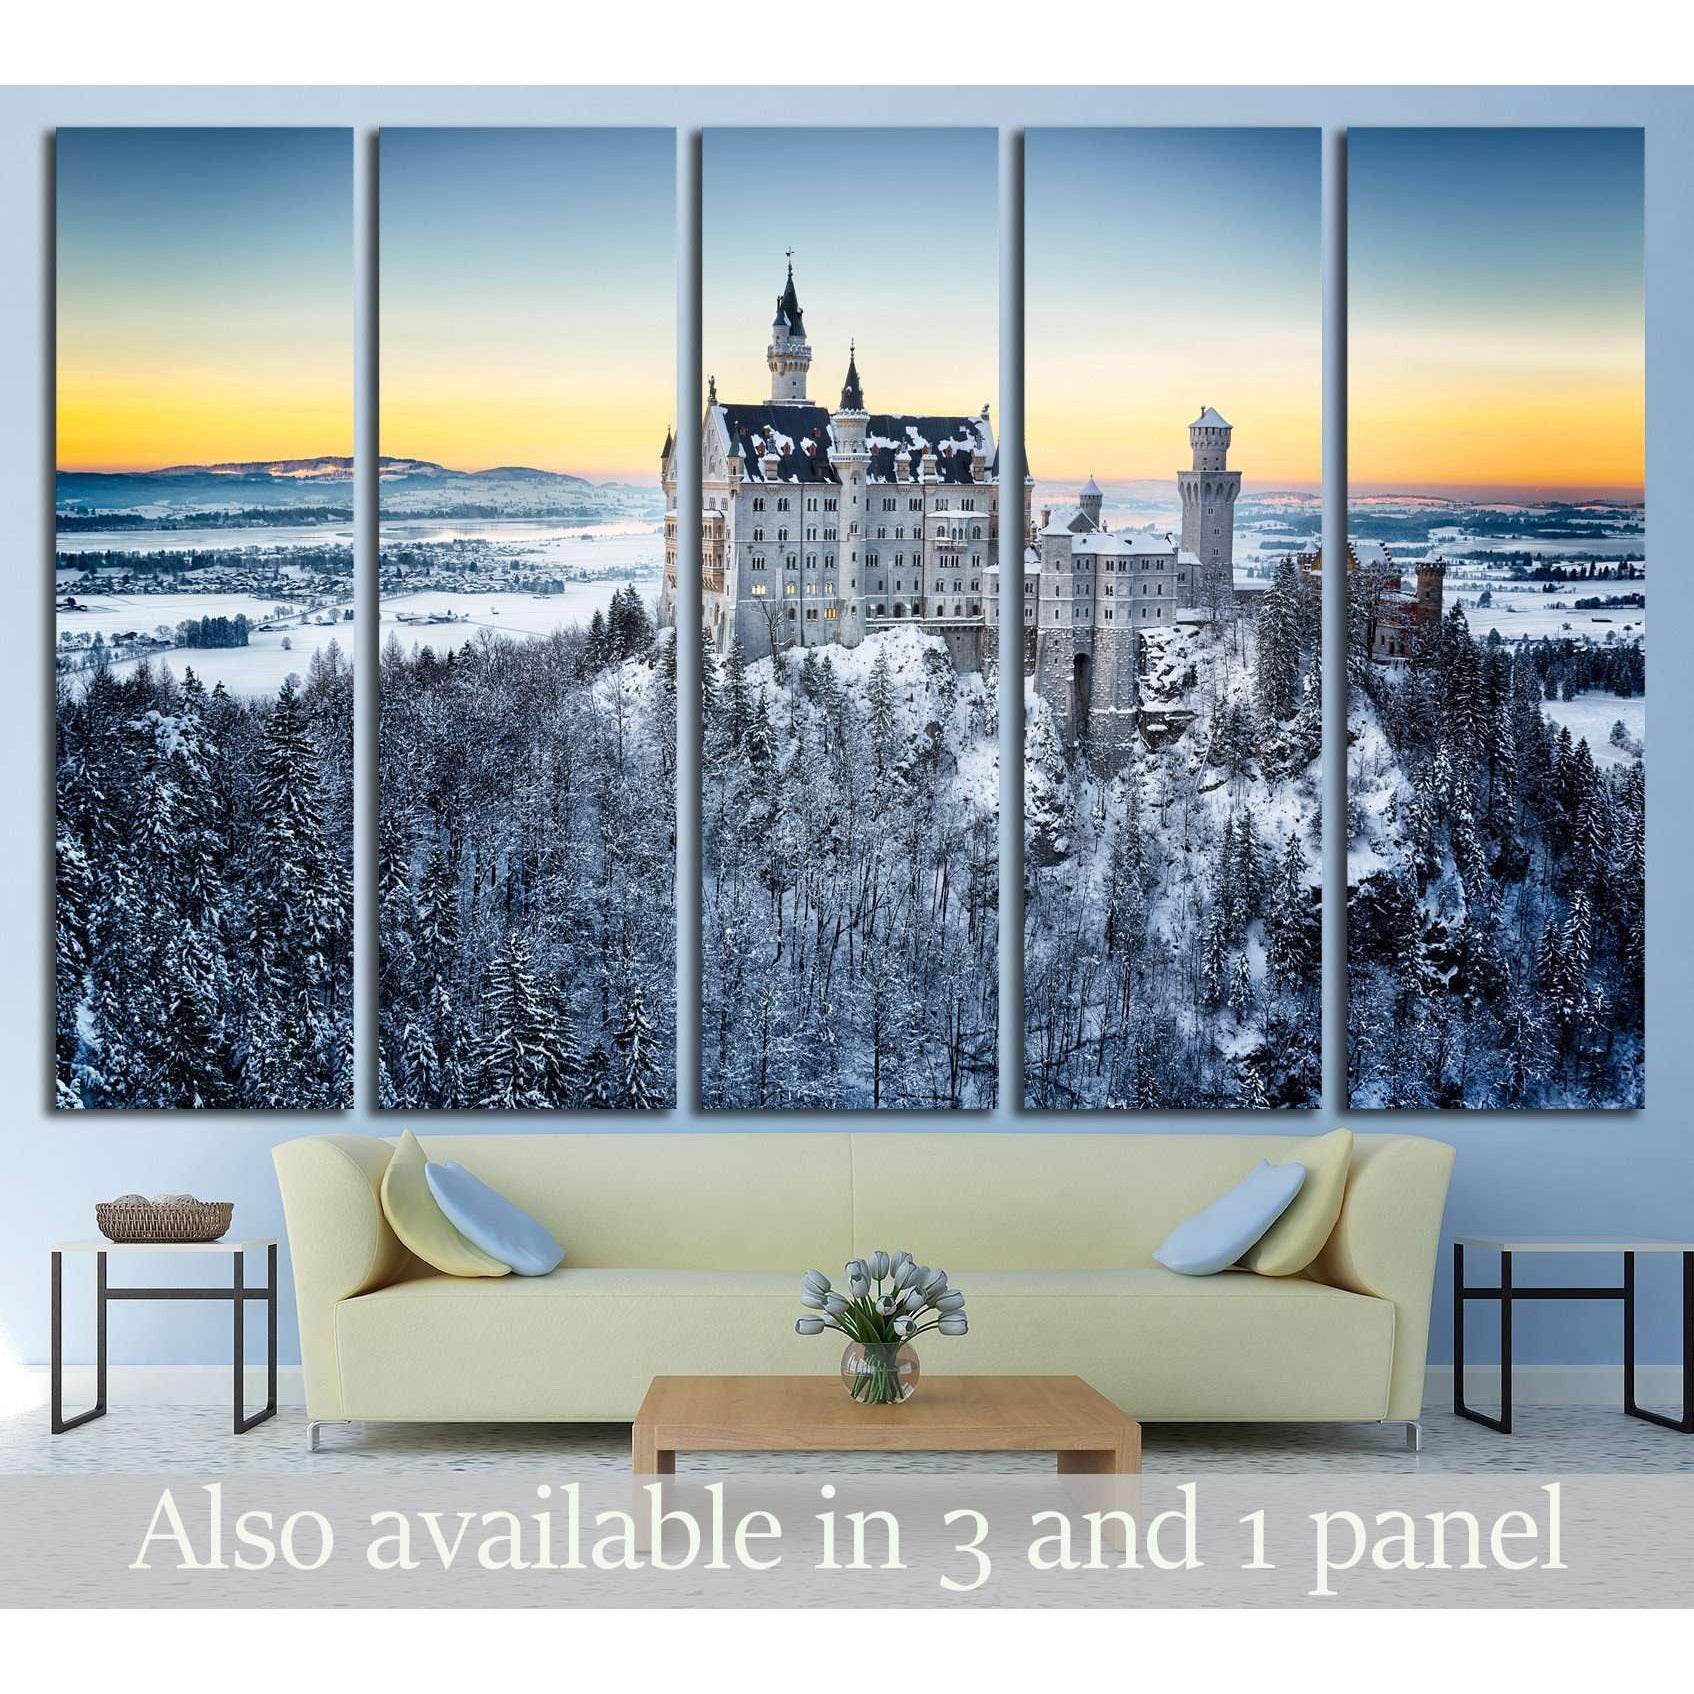 Neuschwanstein Castle at sunset in winter landscape. Germany №1793 Ready to Hang Canvas Print